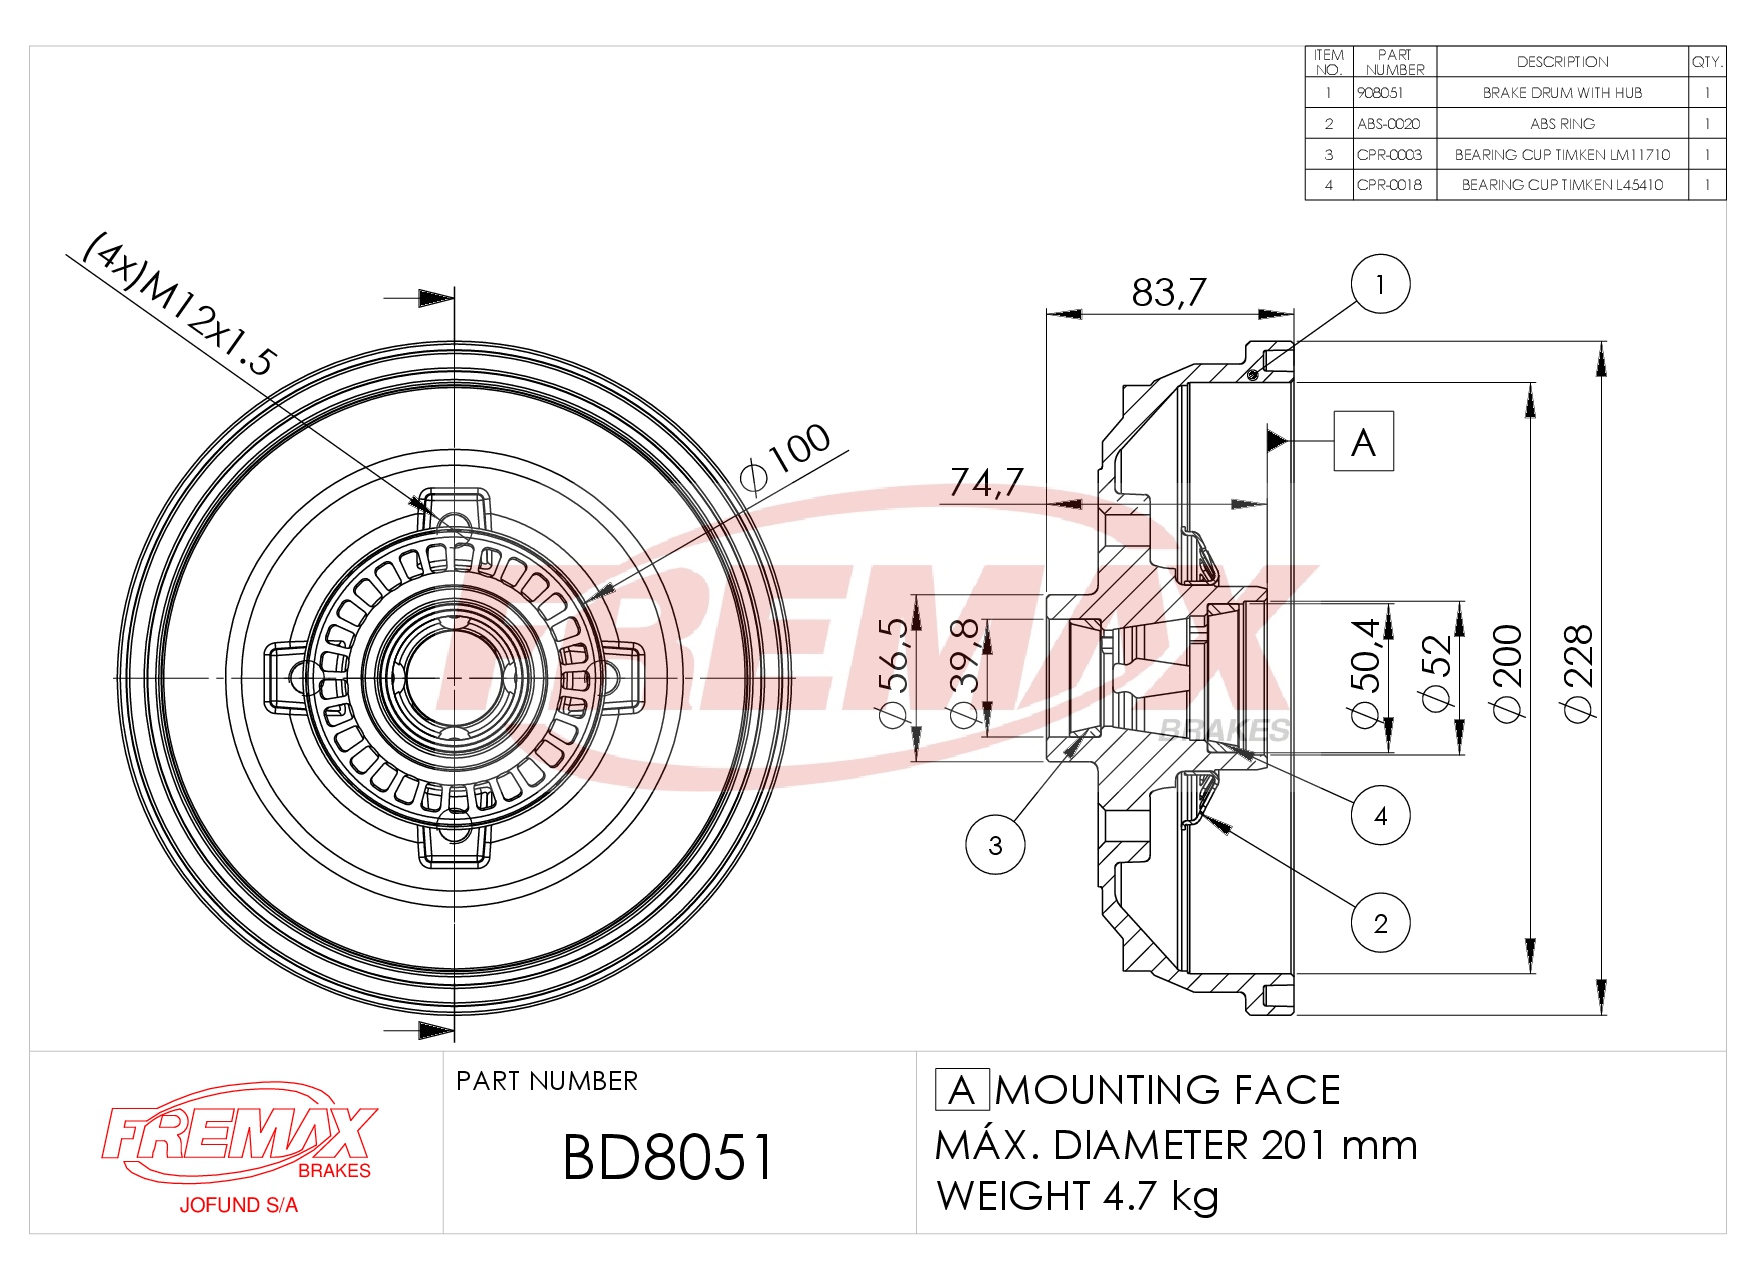 Picture of BD-8051  B.DRUM HC  - COMPONENTS ABS RING (1),BEARING CUP  (2) für Opel Corsa B Abs 93-